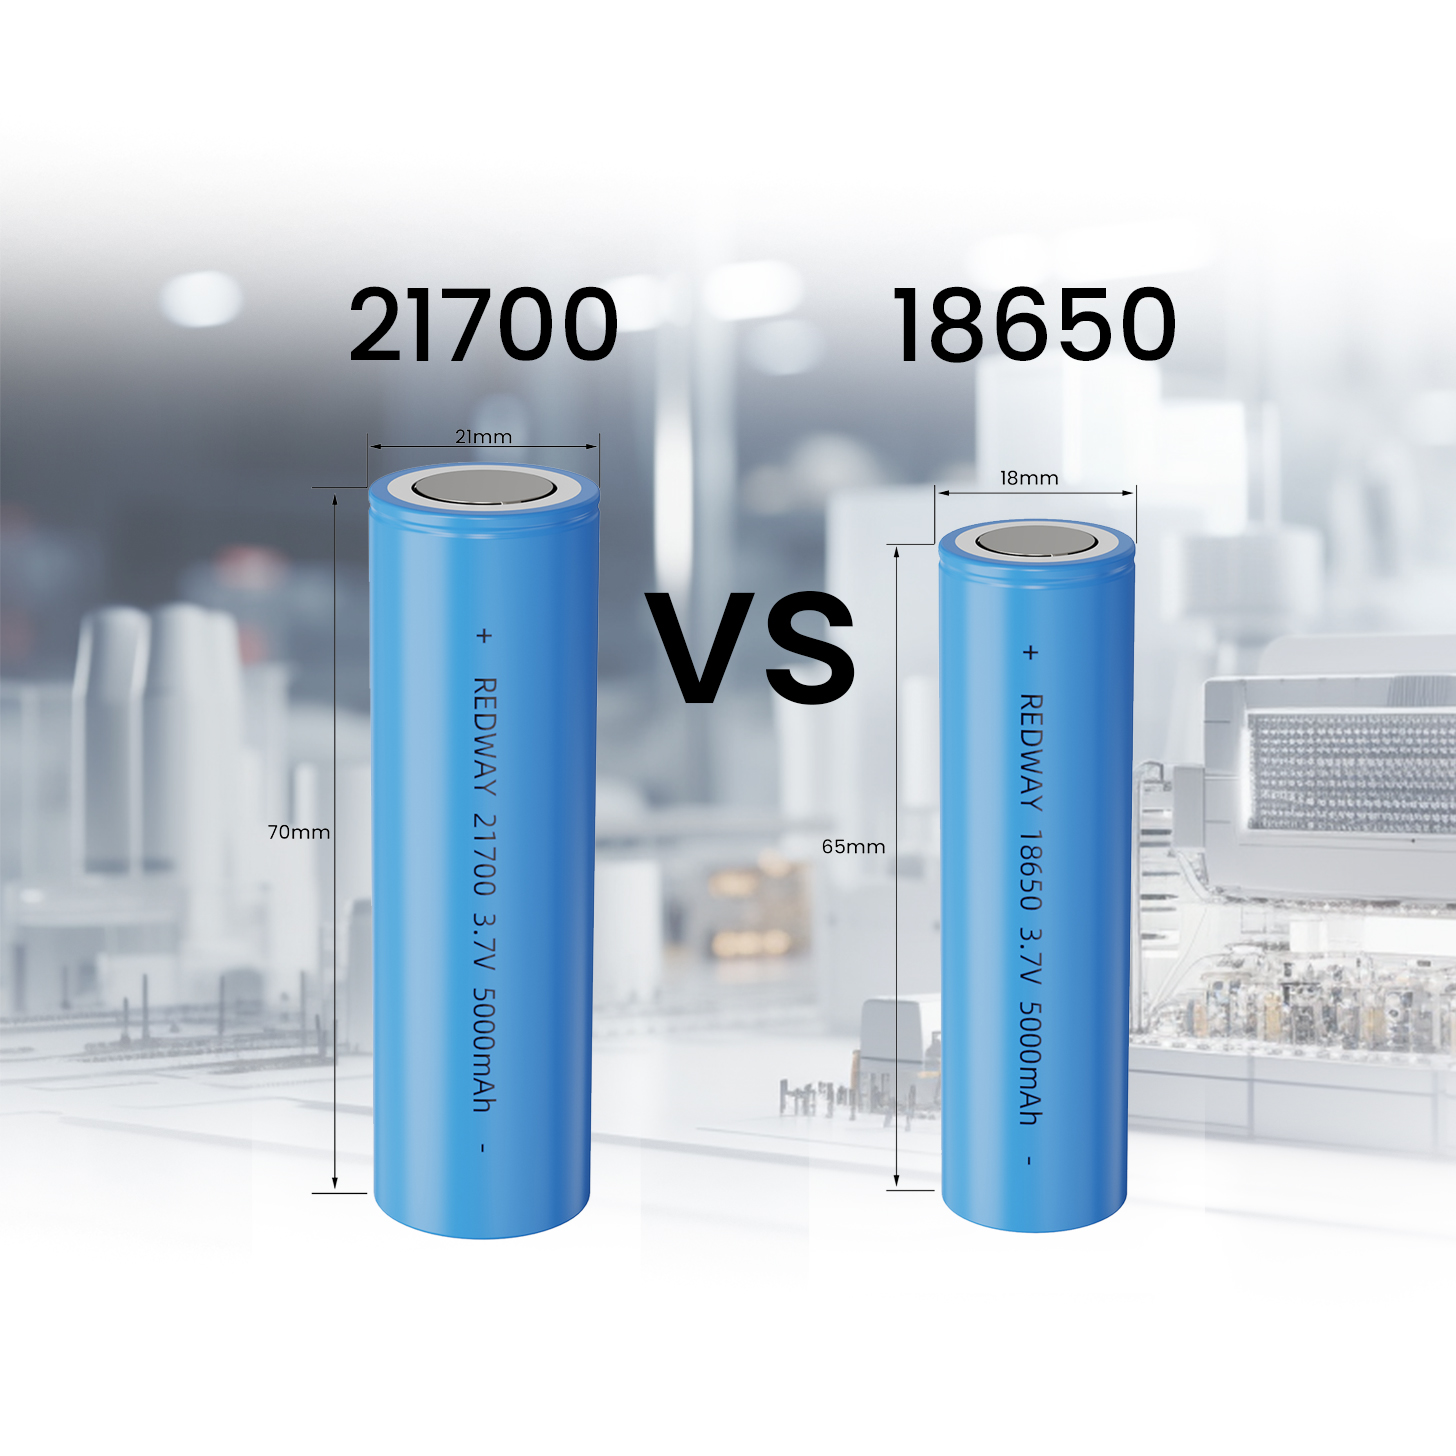 18650, 21700 and 32650 Lithium Batteries Comprehensive Guide